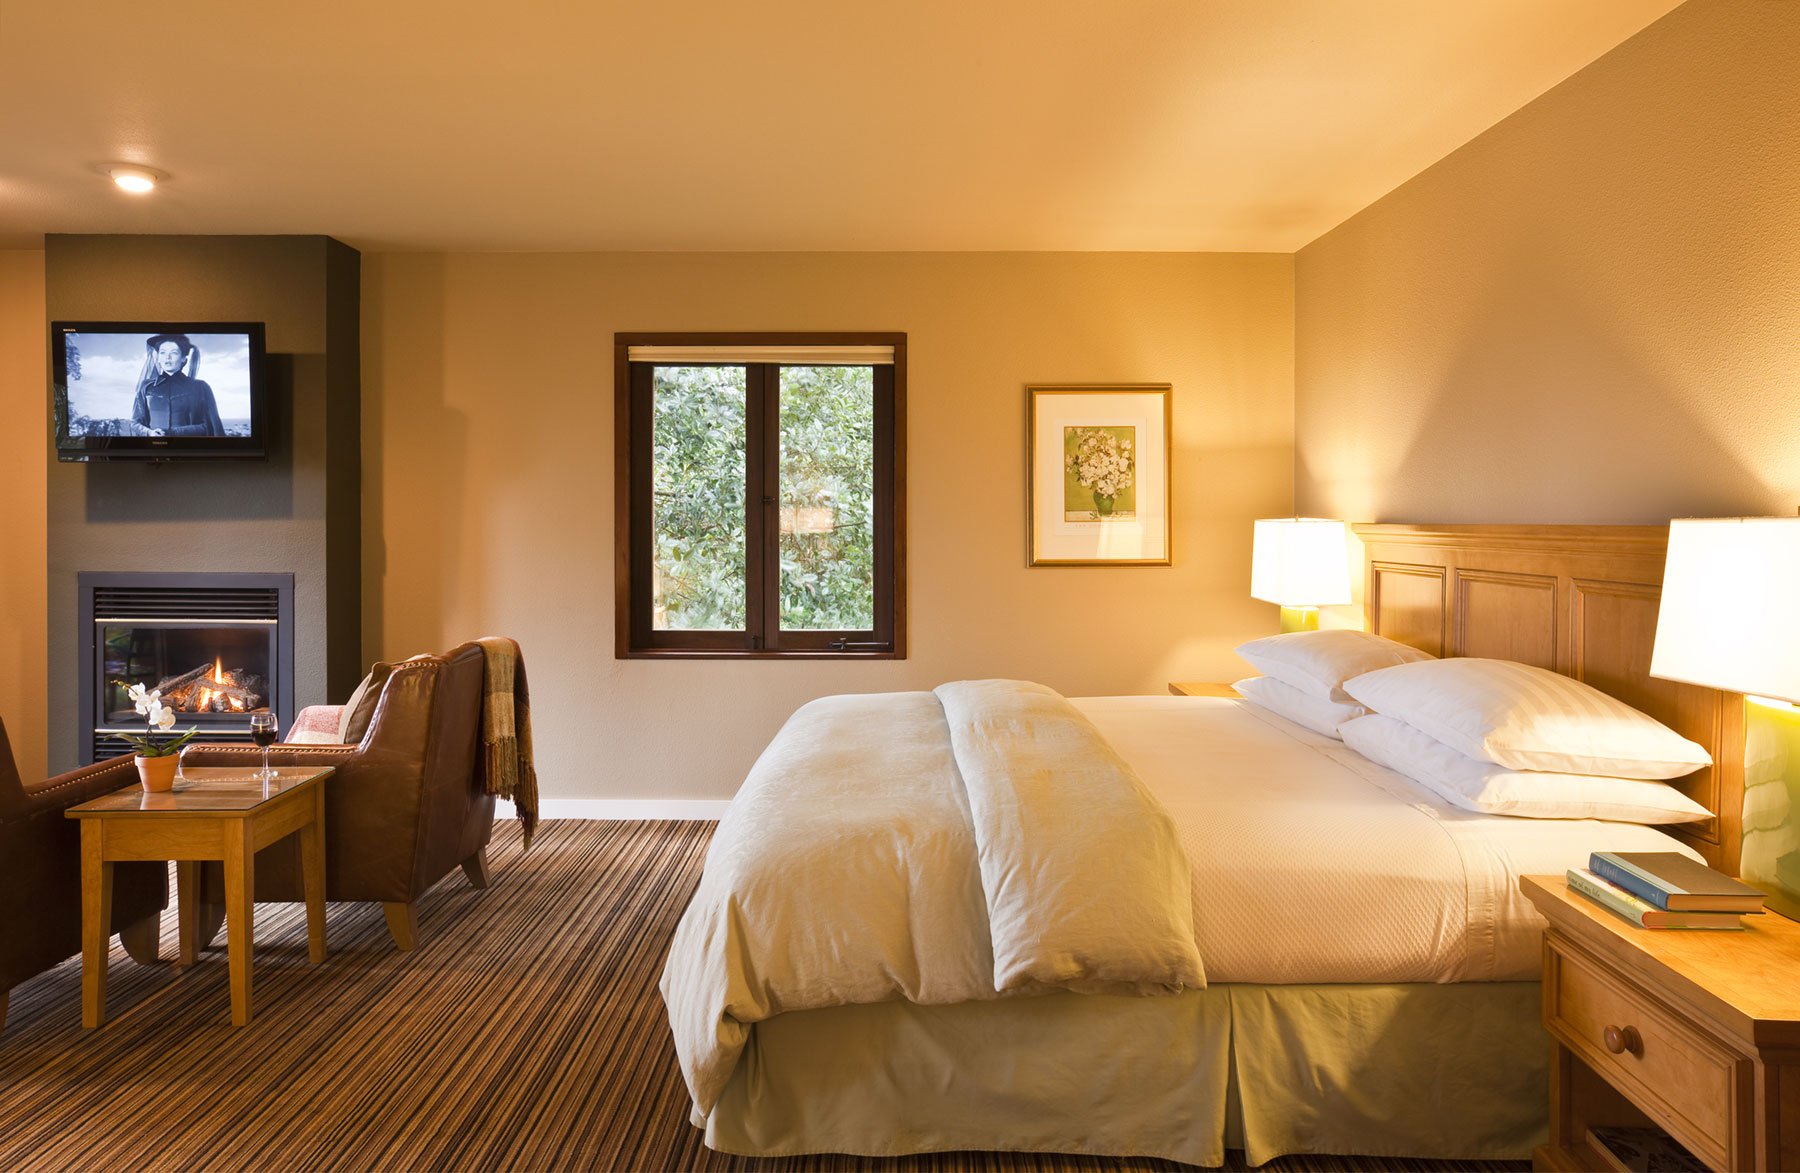 The Madrone room with comfy king size featherbed, flat screen TV, and leather seating around a fireplace